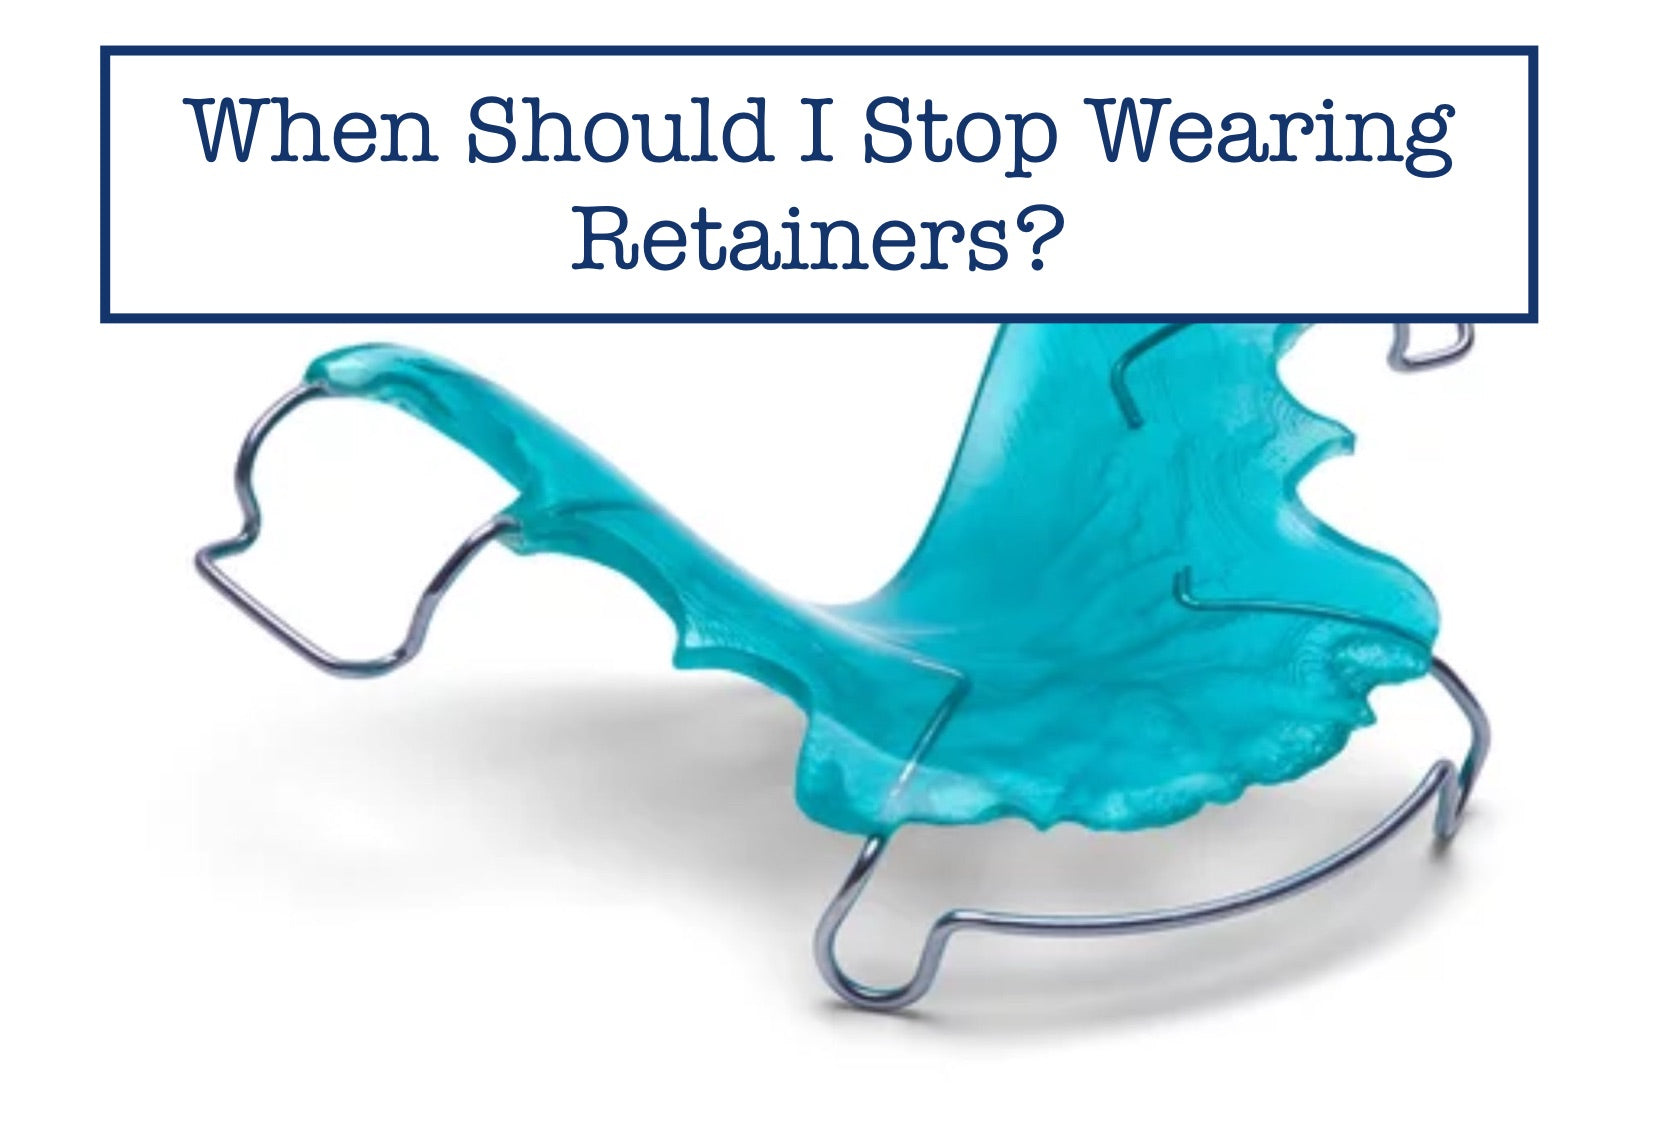 When Should I Stop Wearing Retainers?